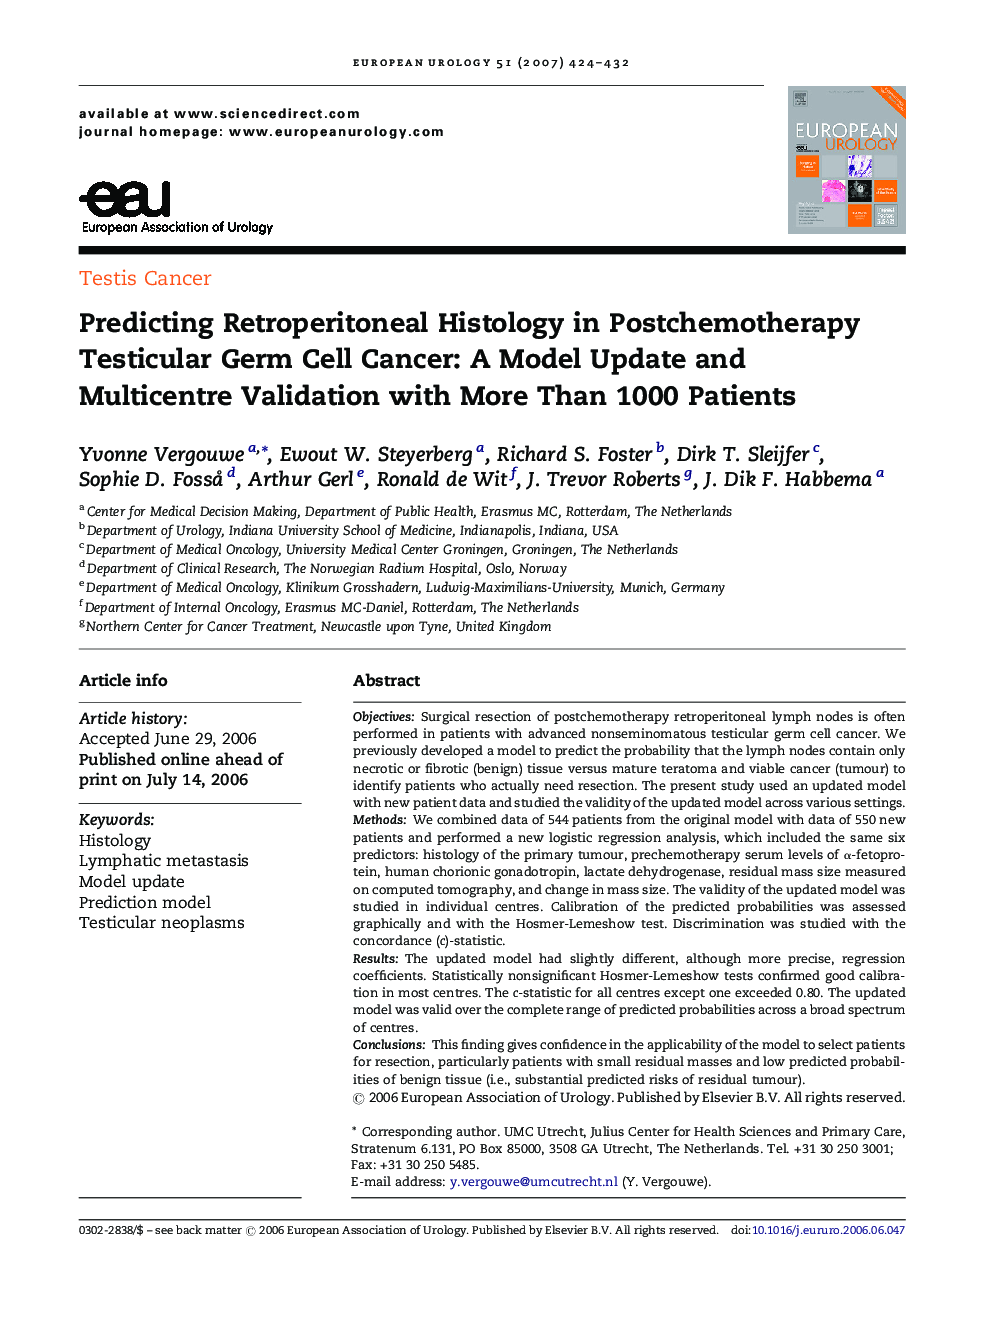 Predicting Retroperitoneal Histology in Postchemotherapy Testicular Germ Cell Cancer: A Model Update and Multicentre Validation with More Than 1000 Patients